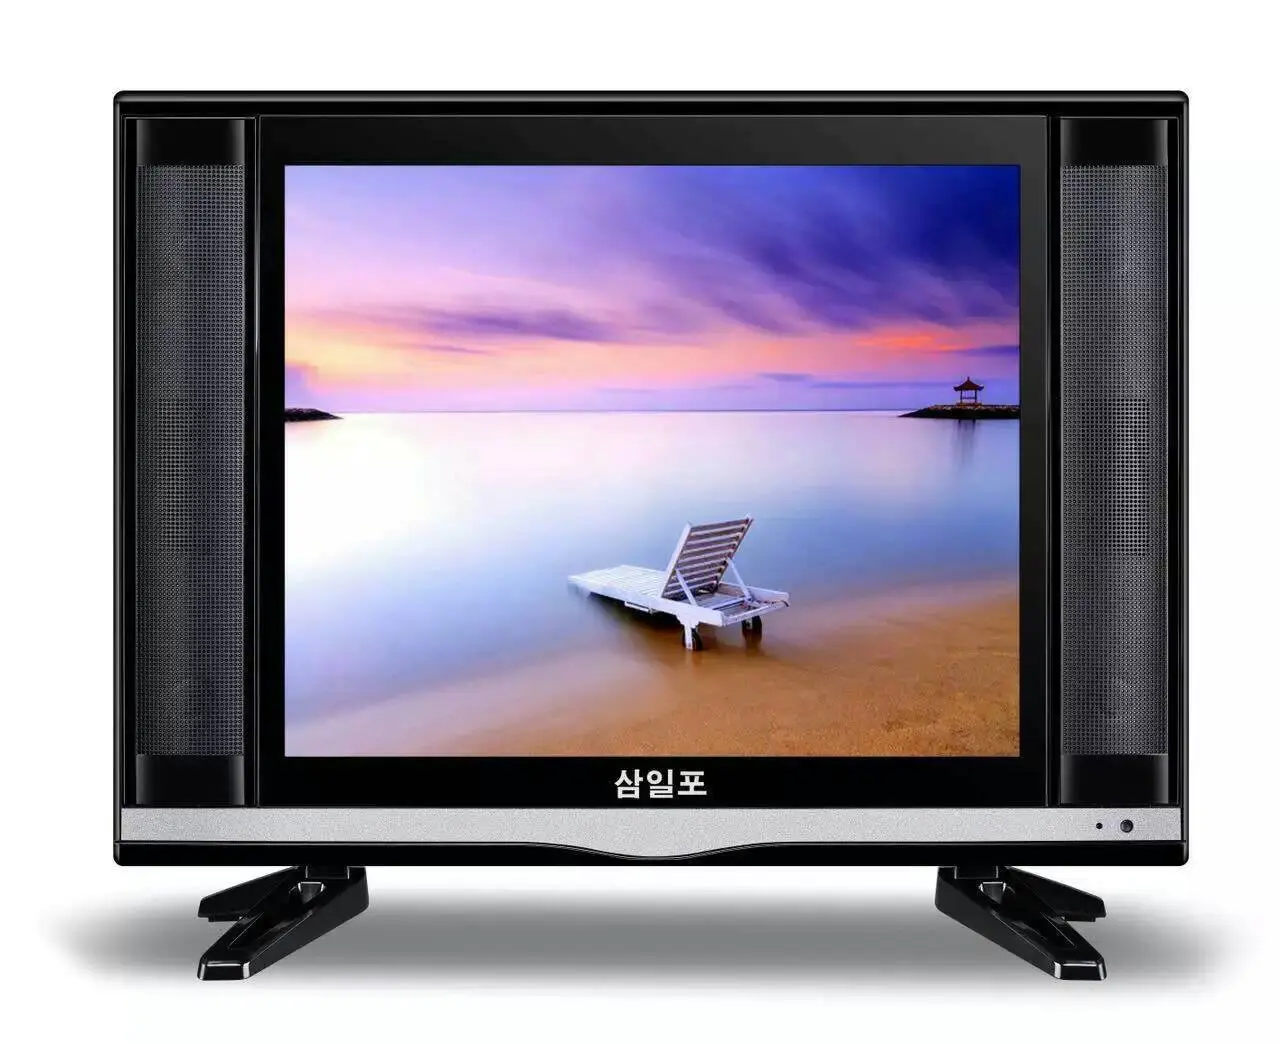 Xinyao LCD 17 inch lcd tv price new style for tv screen